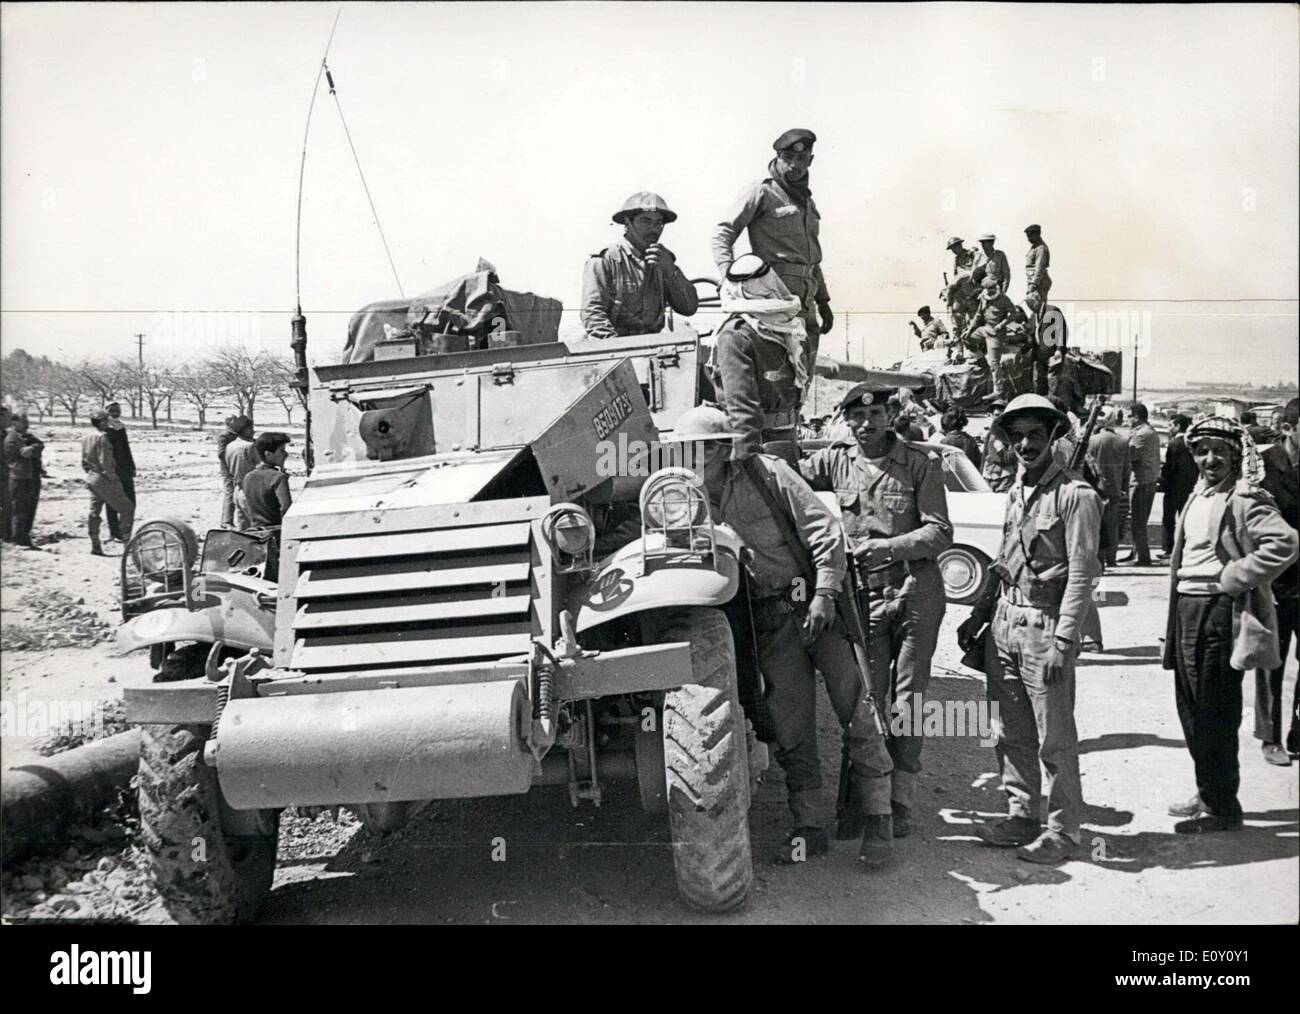 Mar. 03, 1968 - War in the Middle east Israel attacks Jordan. Photo shows  King Hussein visiting the scene of the last Thursday's Israeli aggression  in the Jordan valley inspecting armoured vehicles